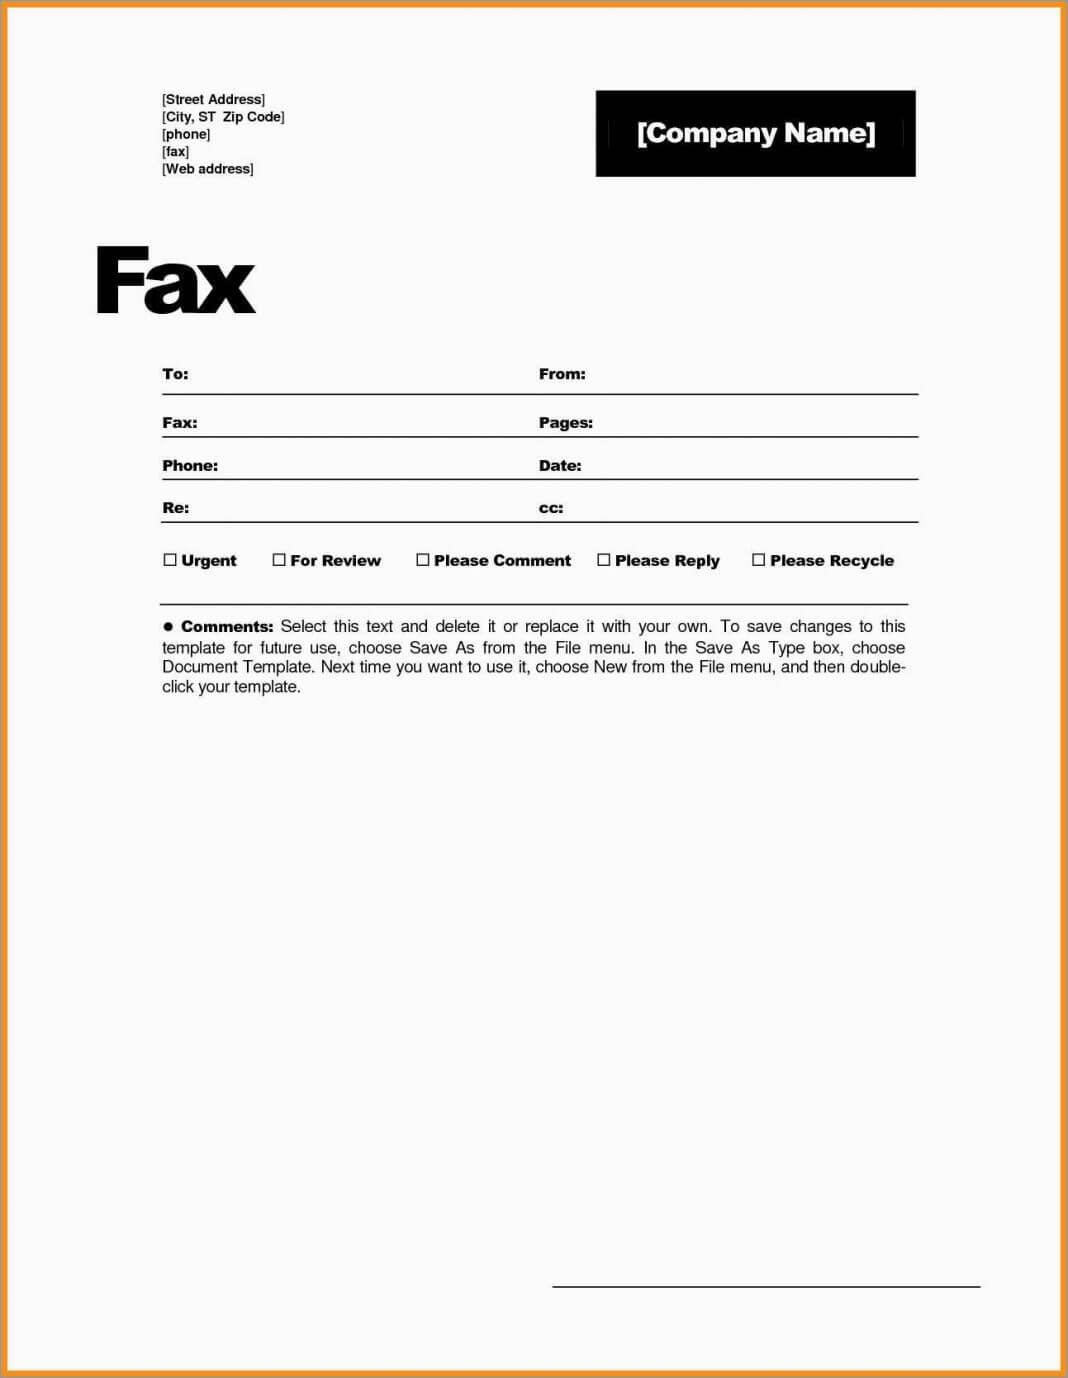 Fax Cover Sheet Plate Word Spreadsheet Examples Page Free For Fax Cover Sheet Template Word 2010